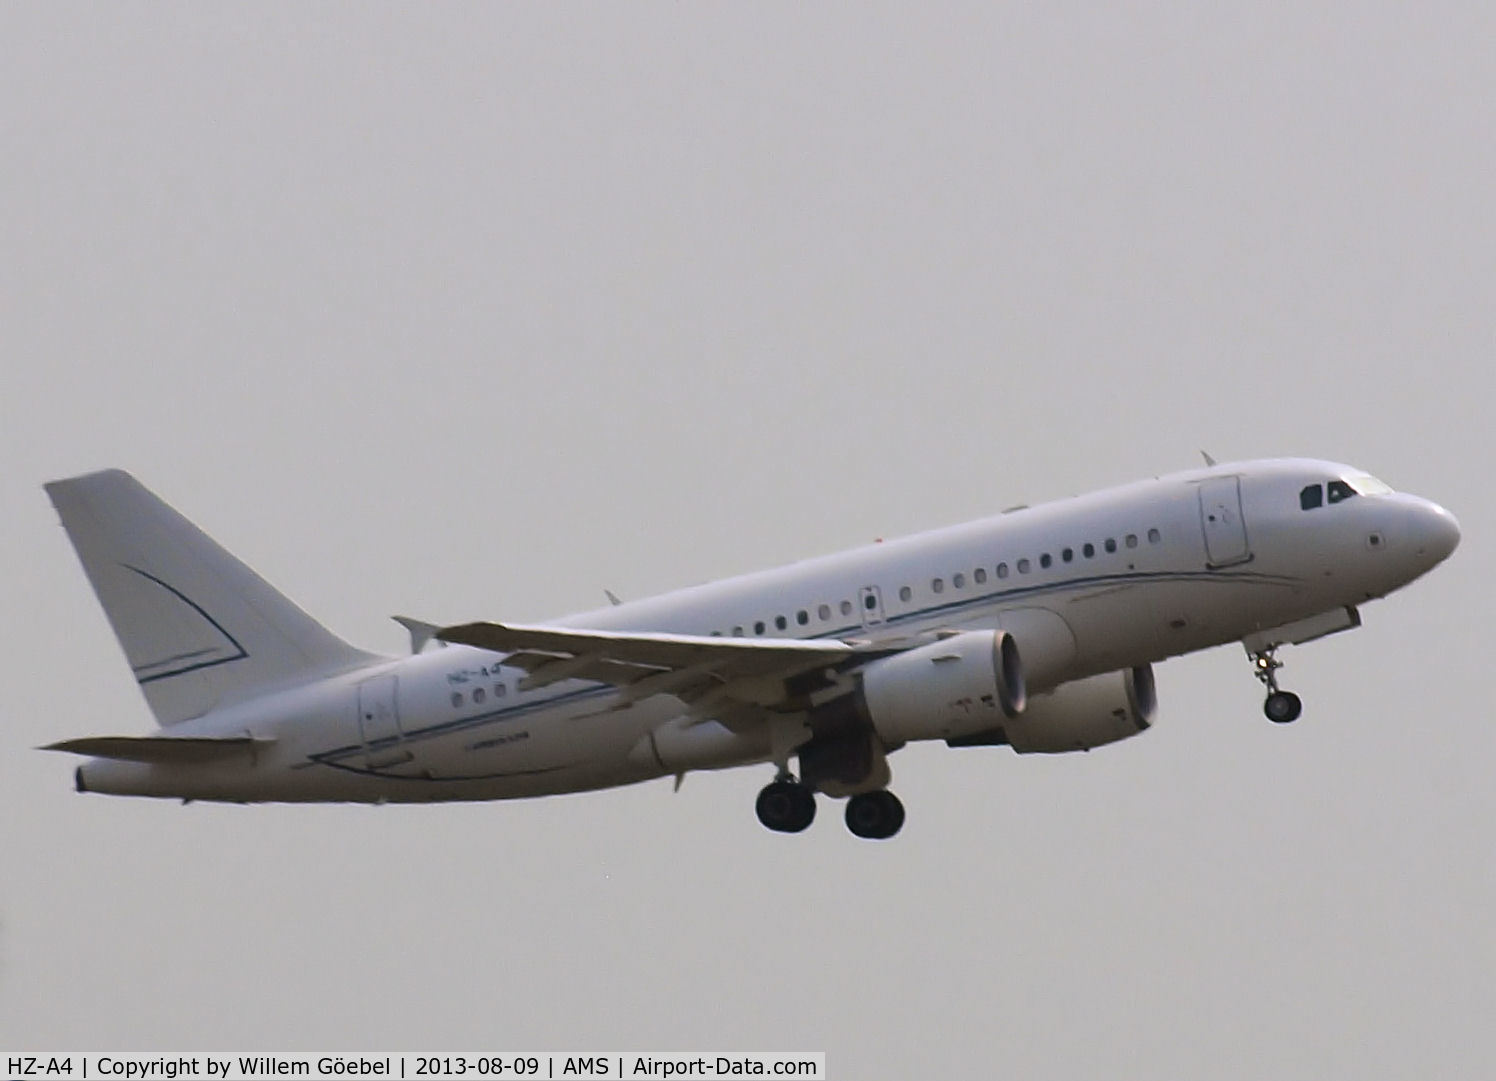 HZ-A4, 2001 Airbus A319-112 C/N 1494, Take off from runway L18 of Schiphol Airport